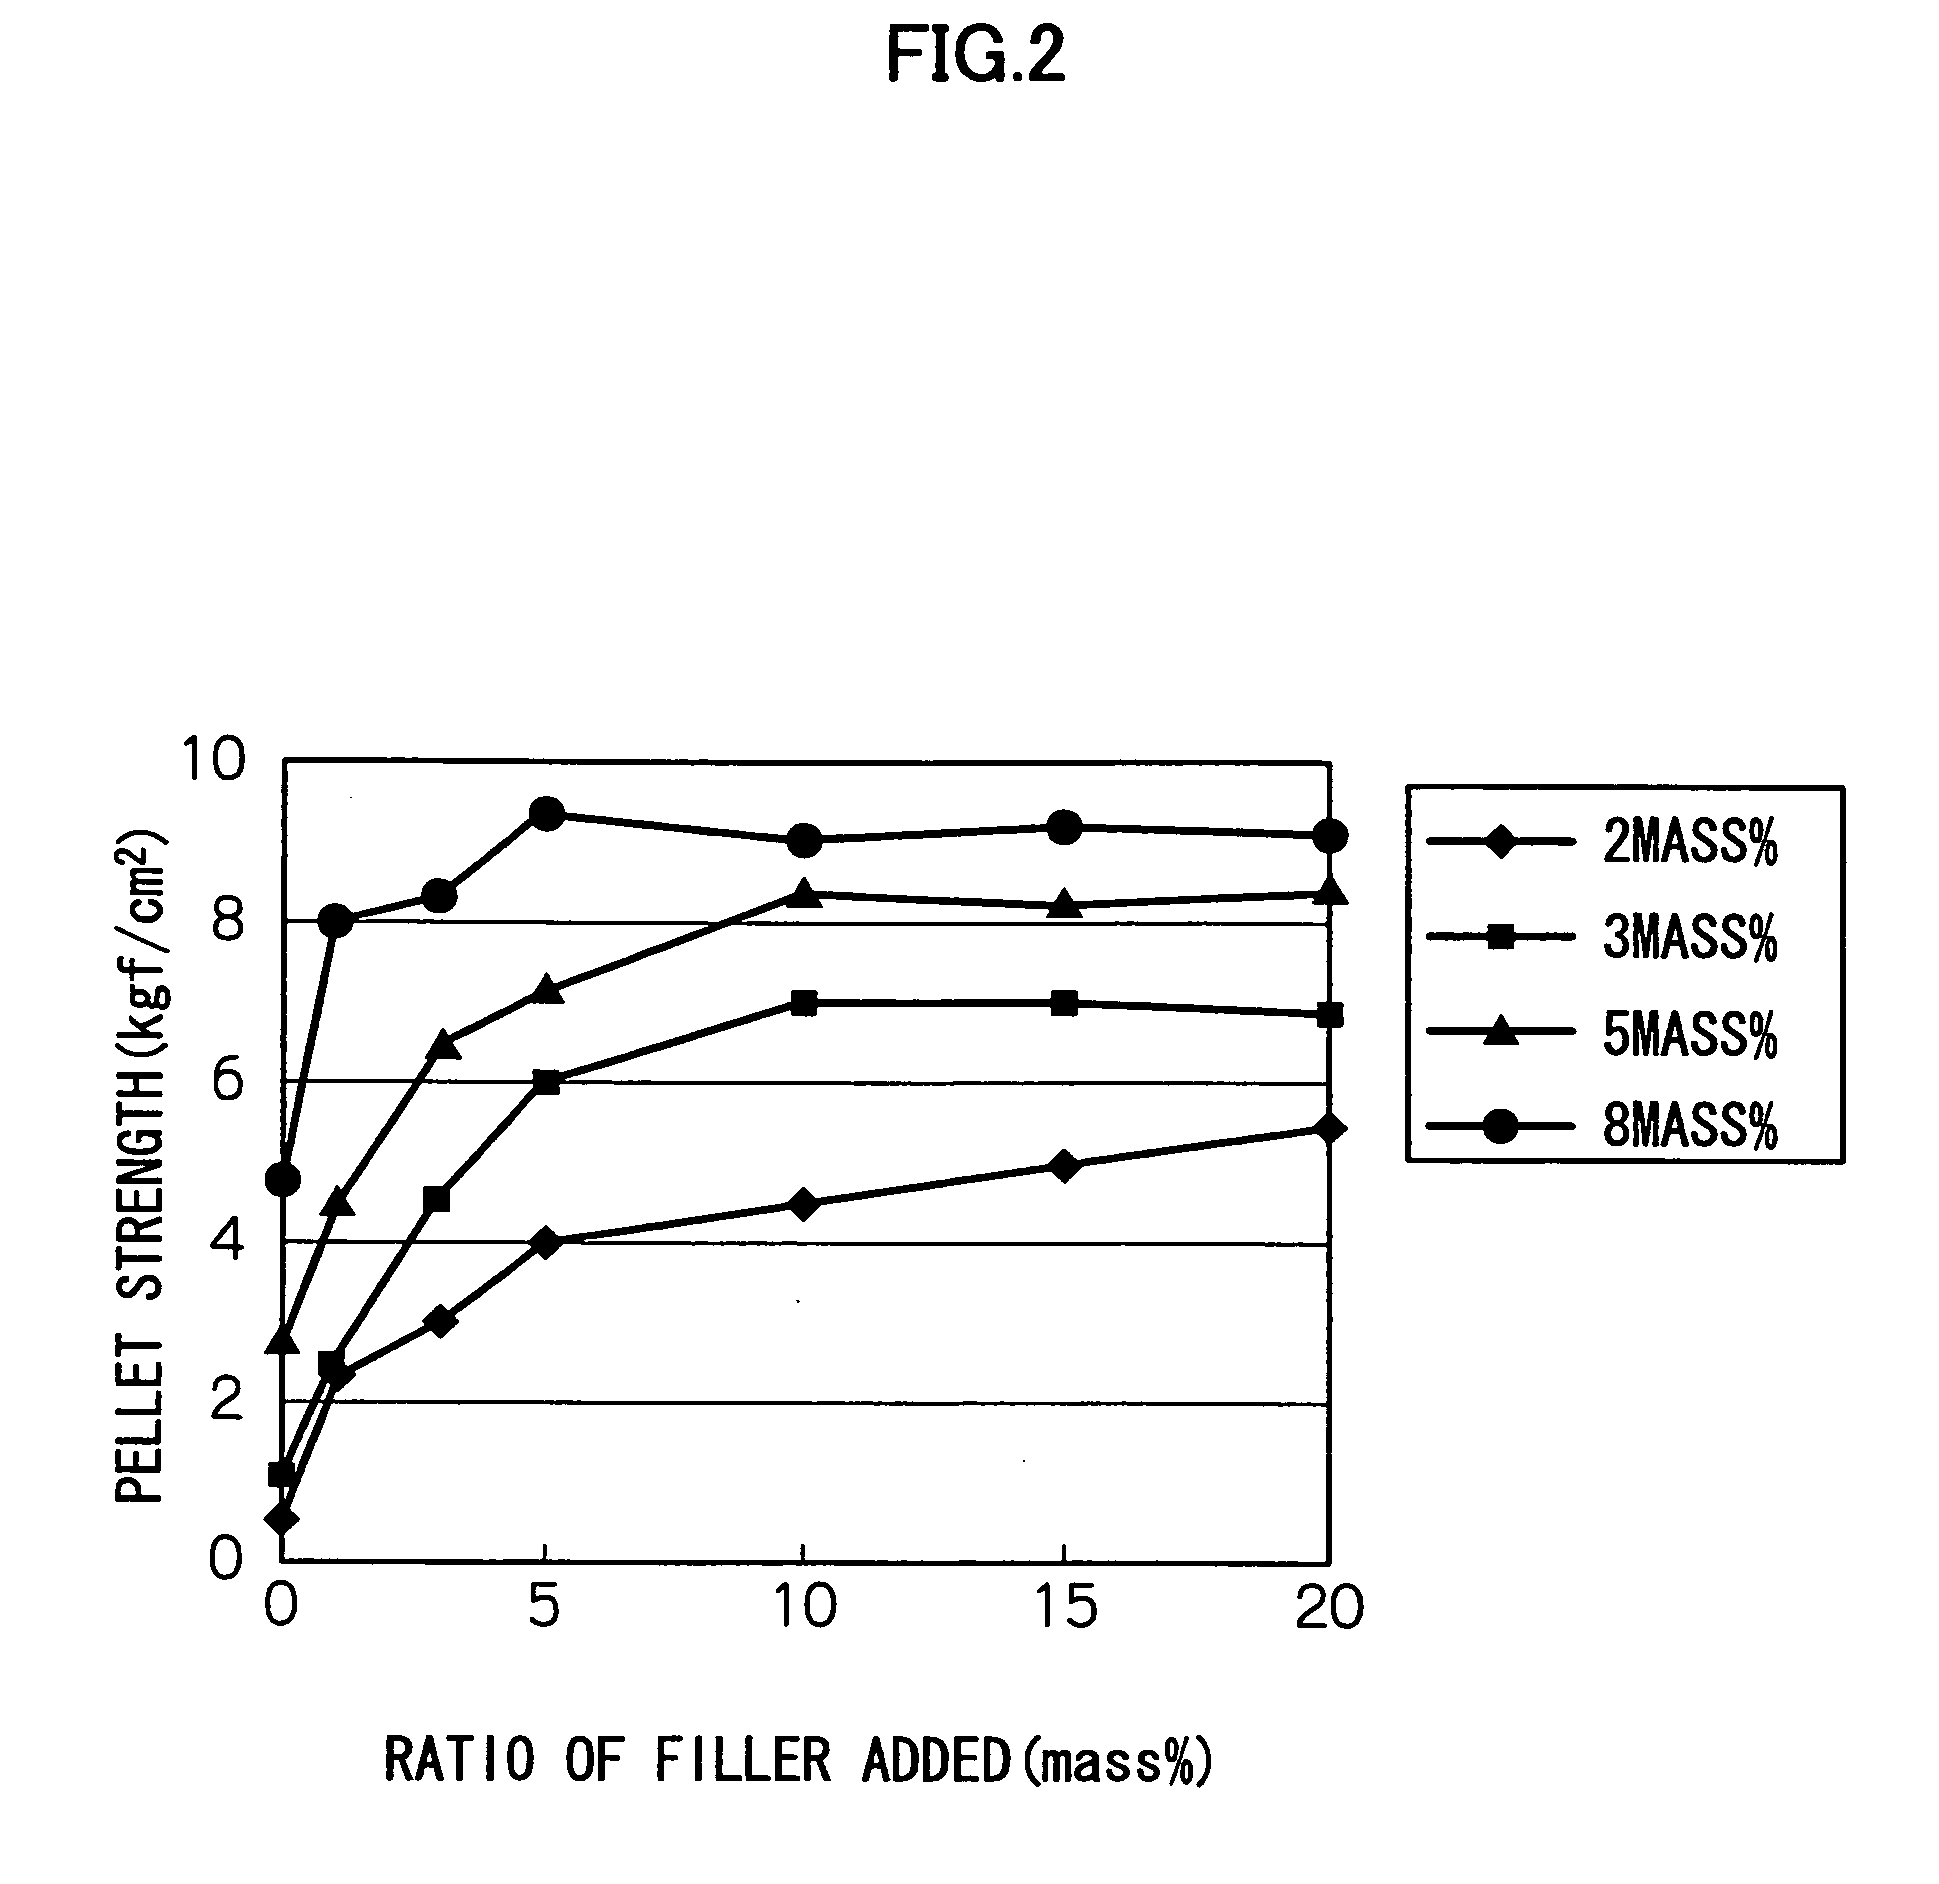 Entrapping immobilization pellets and process for producing the same